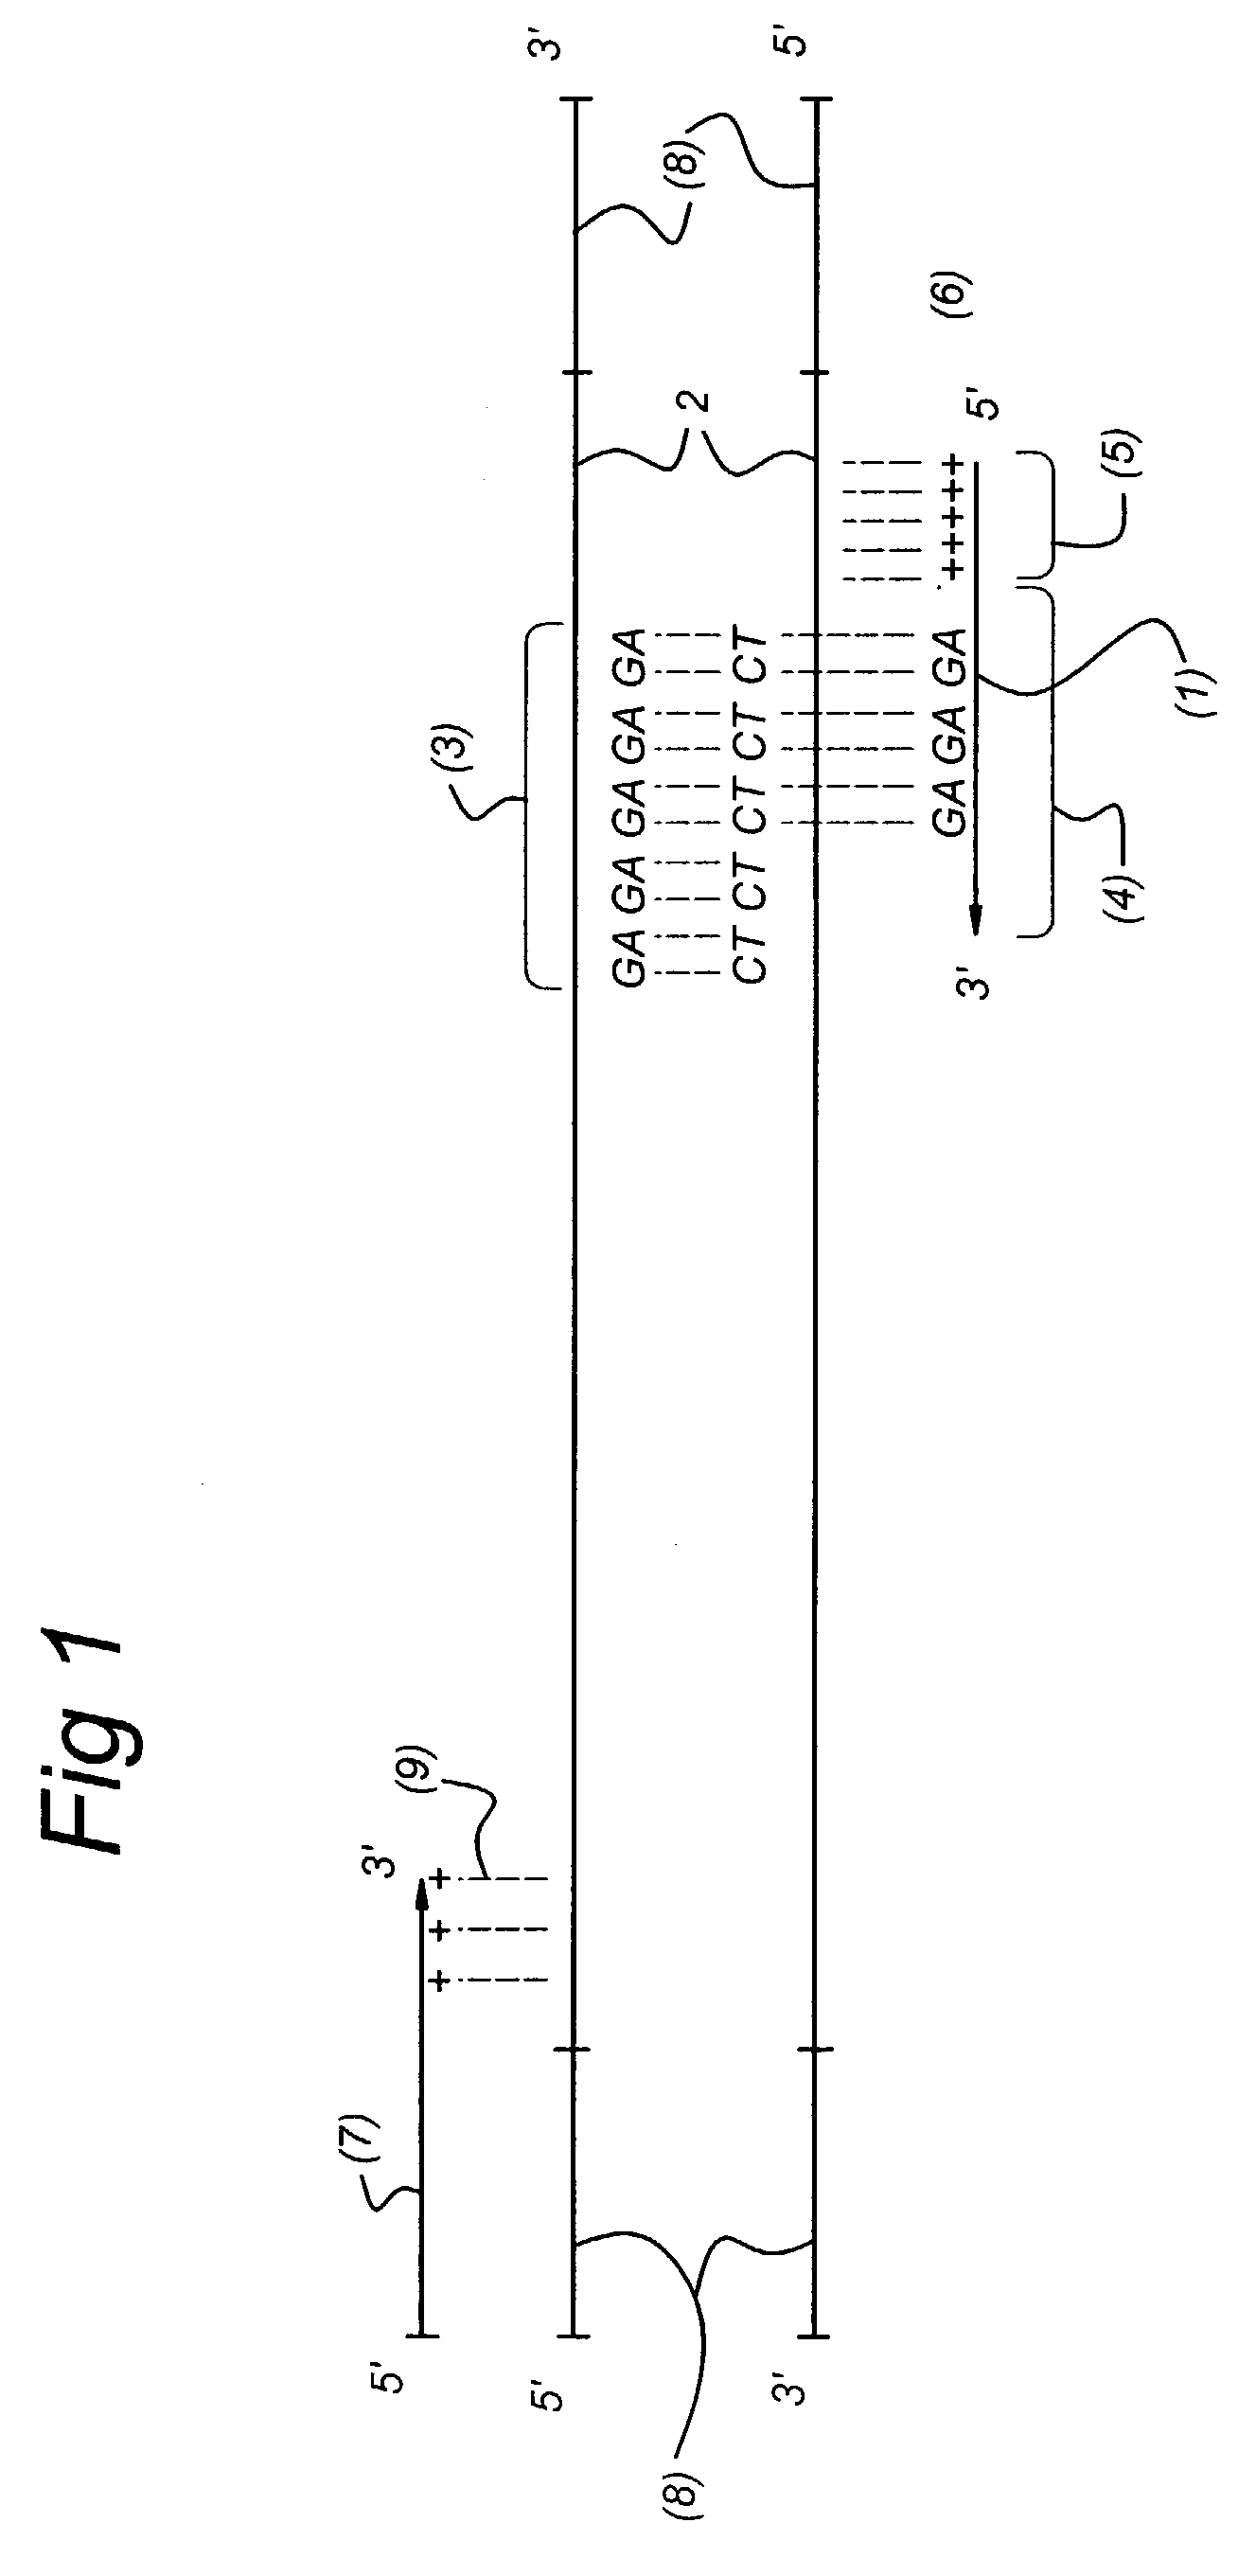 Methods and kits comprising AFLP primers, and ramp primers with a part complementary to a compound microsatellite repeat and an anchor part complementary to nucleotides adjacent to the repeat